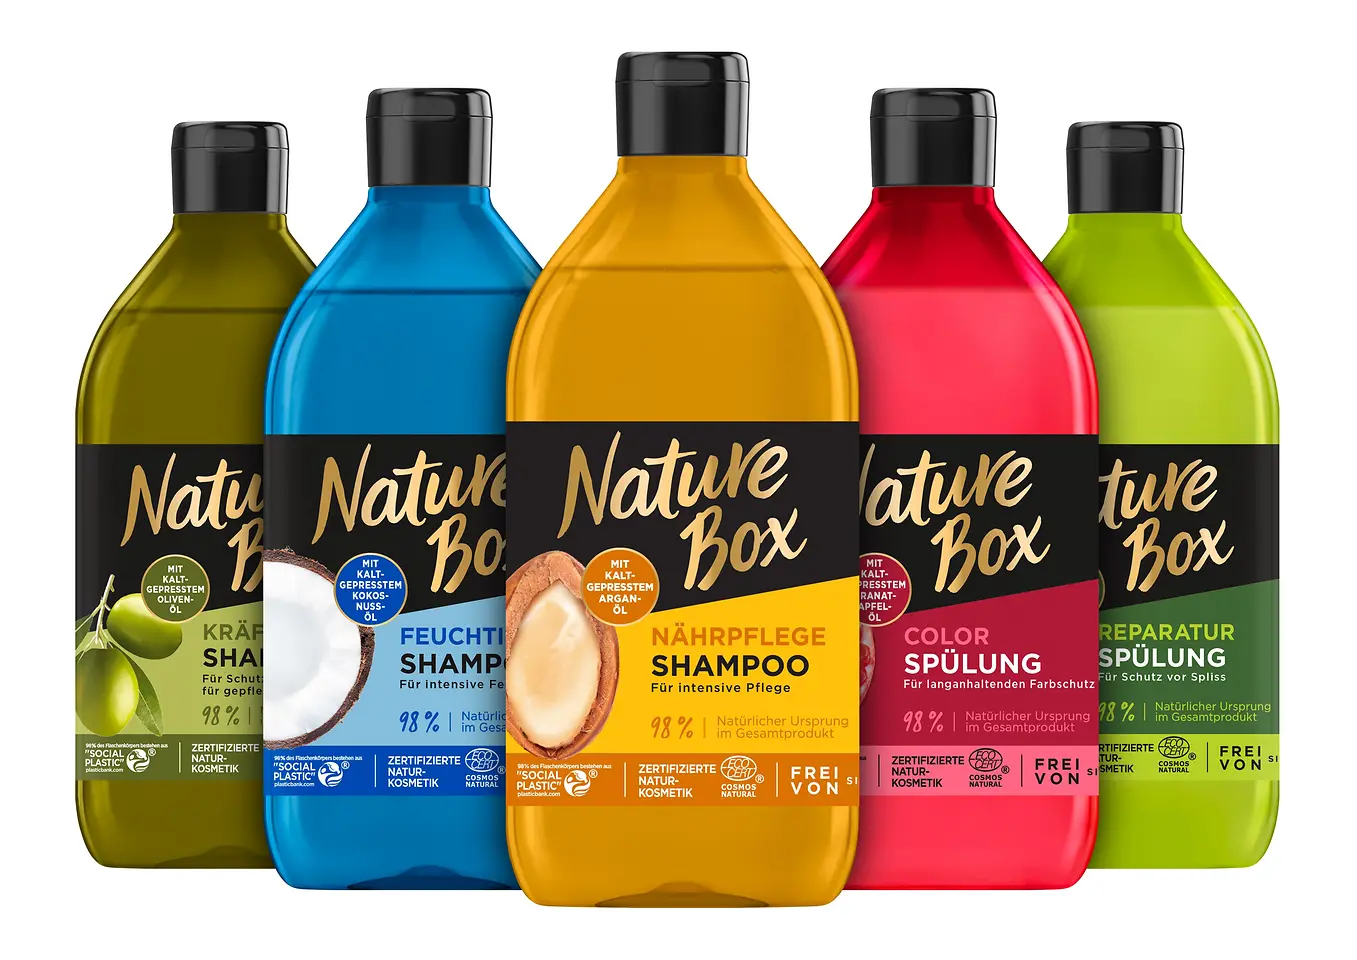 Five colorful bottles of Nature Box lined up next to each other.